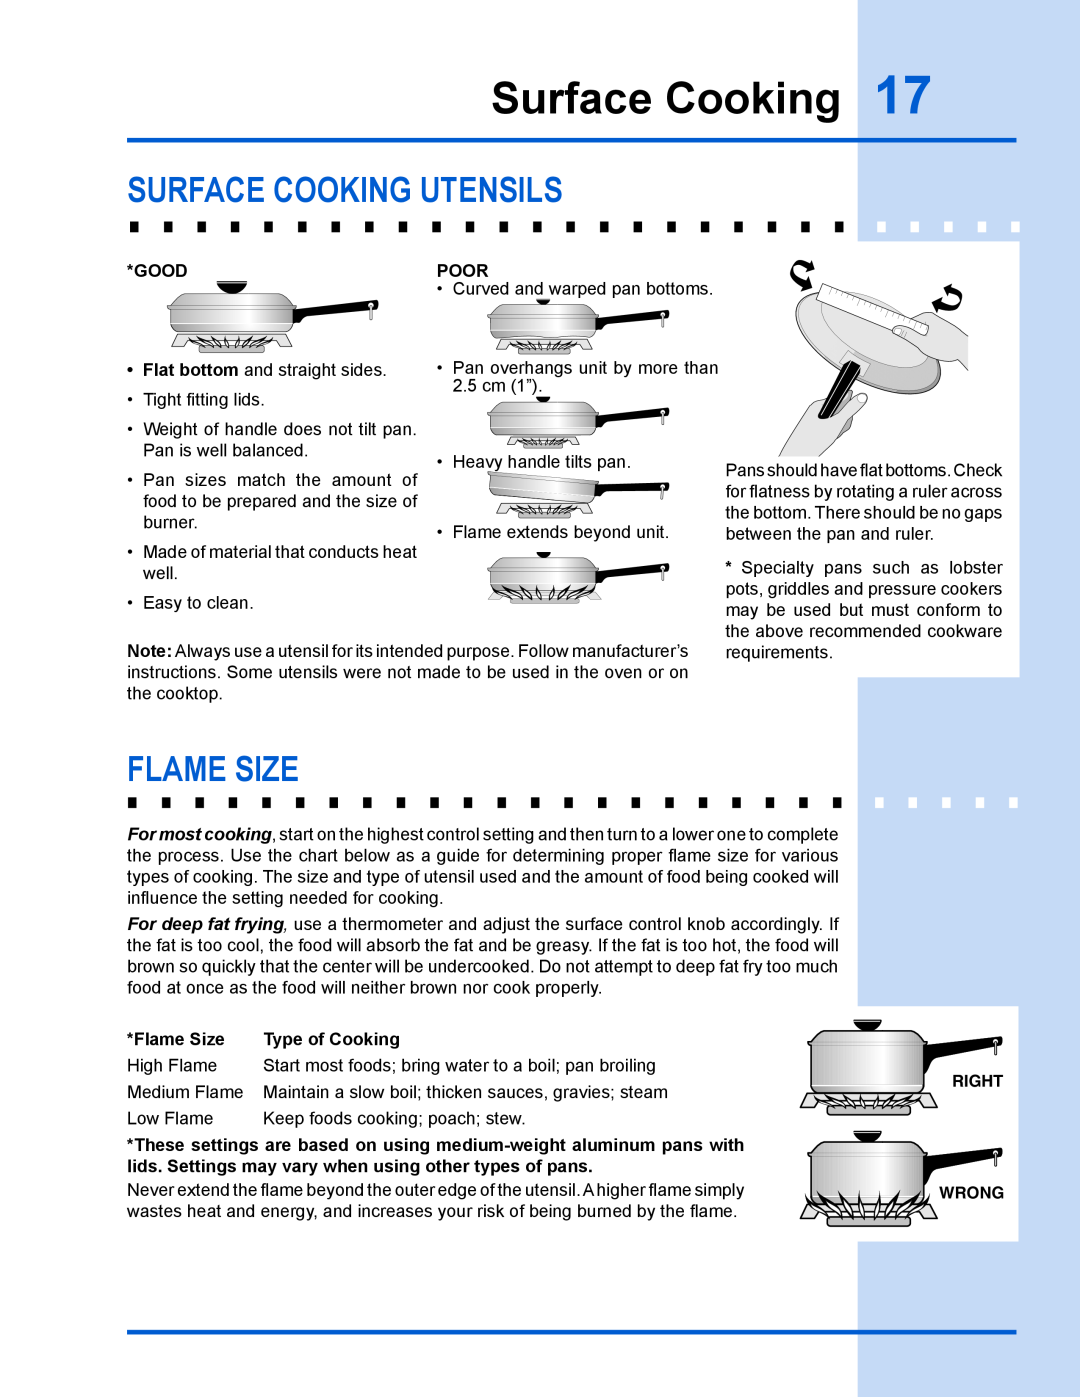 Electrolux EW30GS65GS manual Surface Cooking, Surface cooking utensils, flame size, Good, Poor, Flame Size, Type of Cooking 